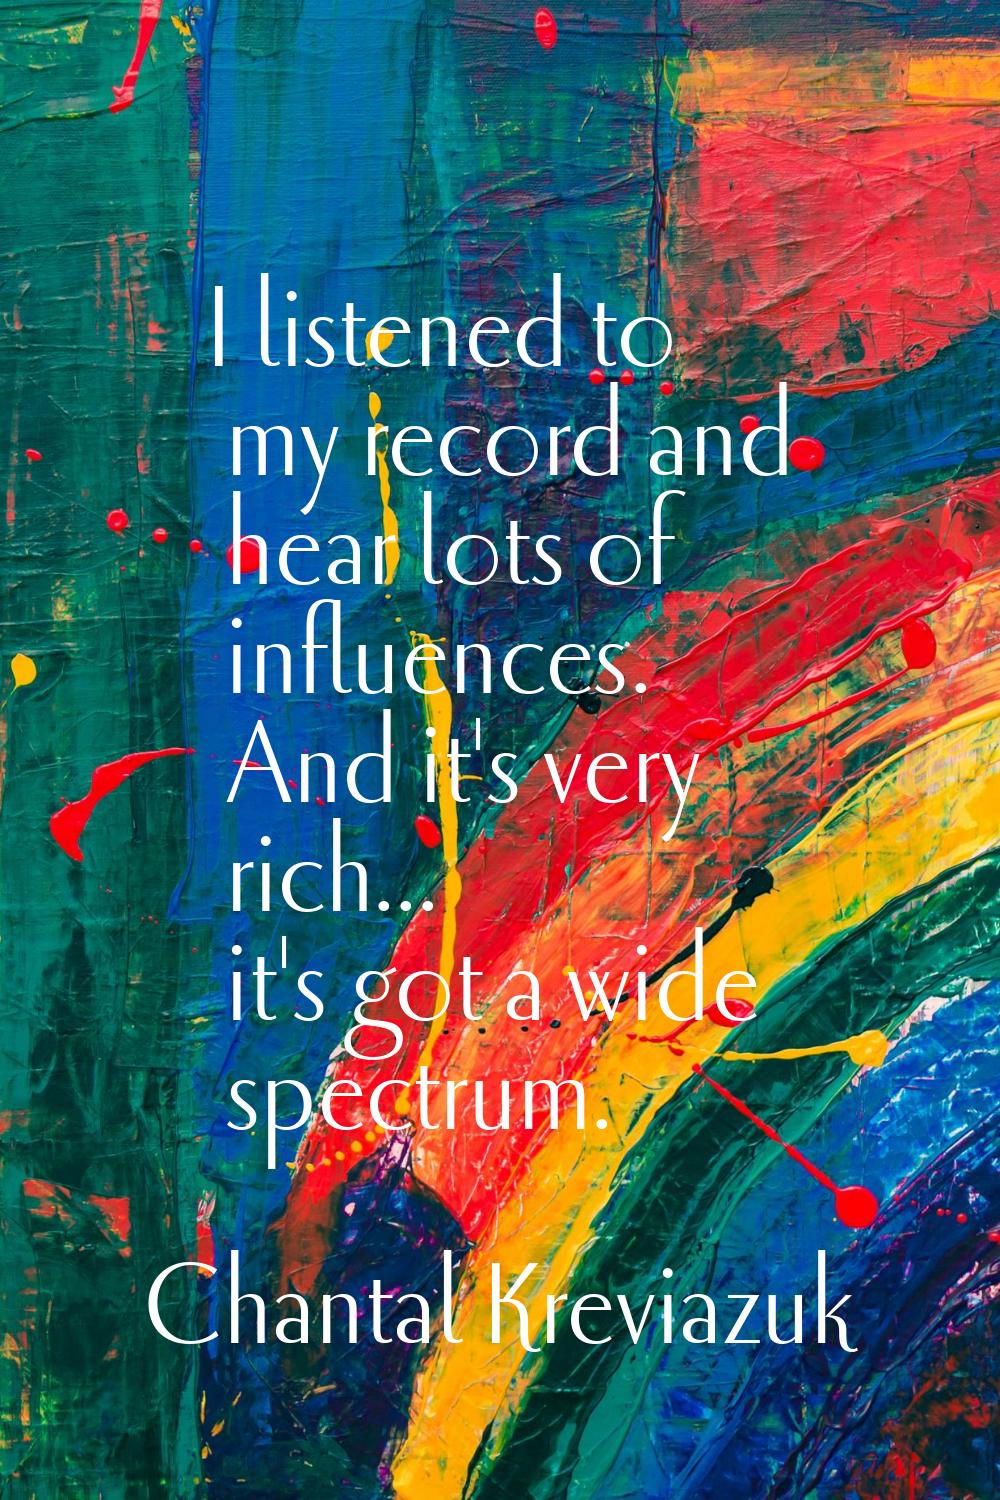 I listened to my record and hear lots of influences. And it's very rich... it's got a wide spectrum